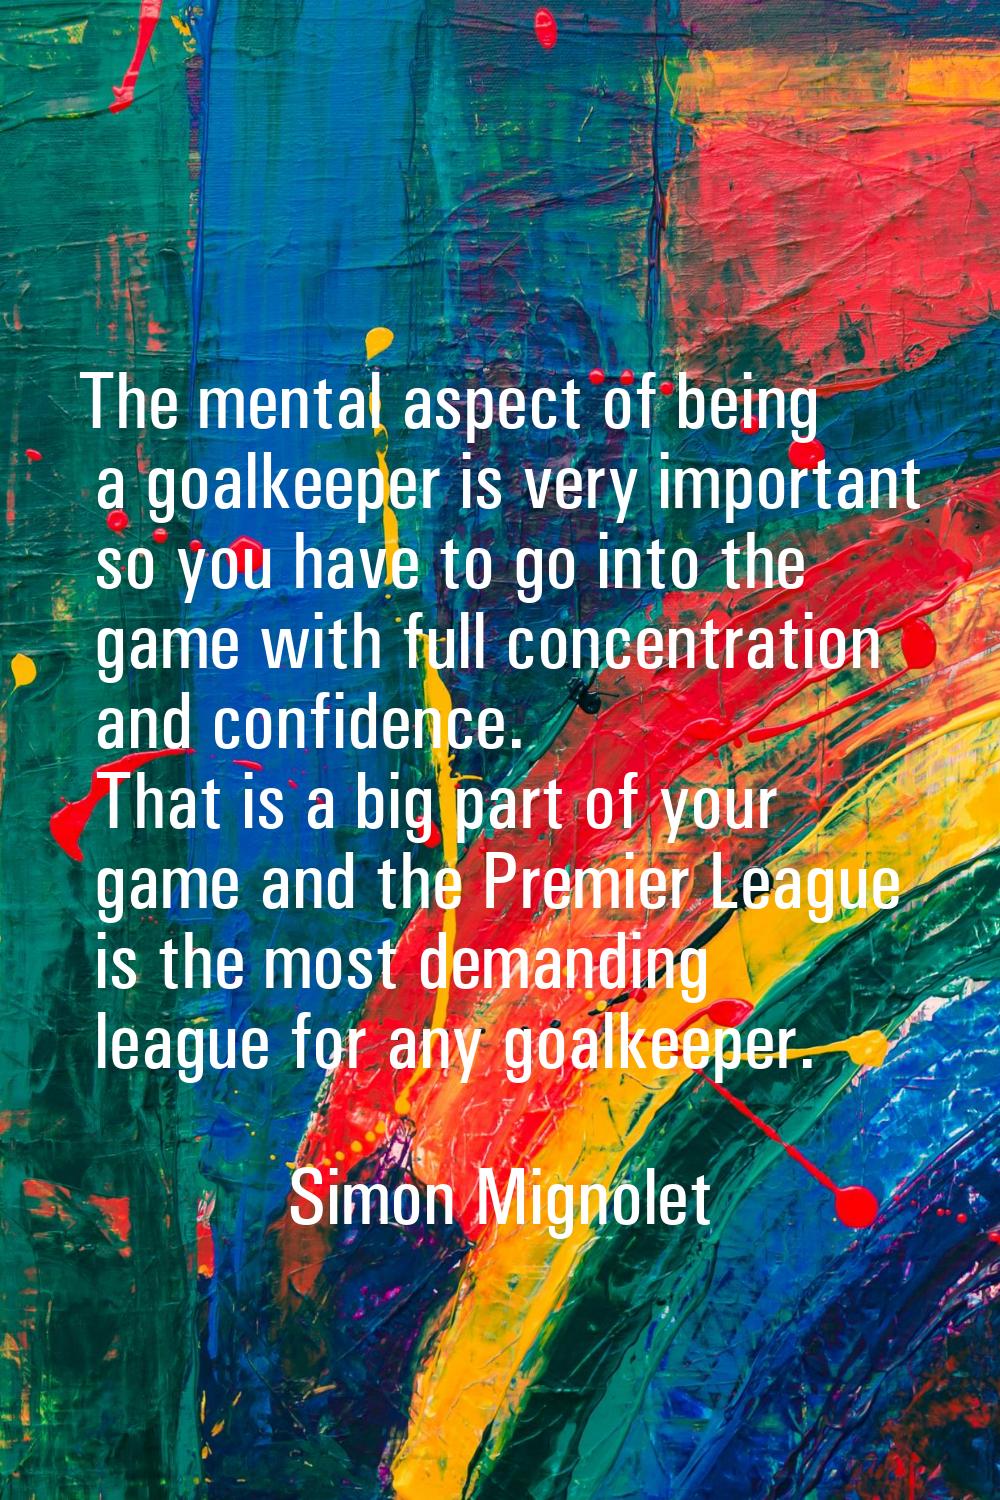 The mental aspect of being a goalkeeper is very important so you have to go into the game with full